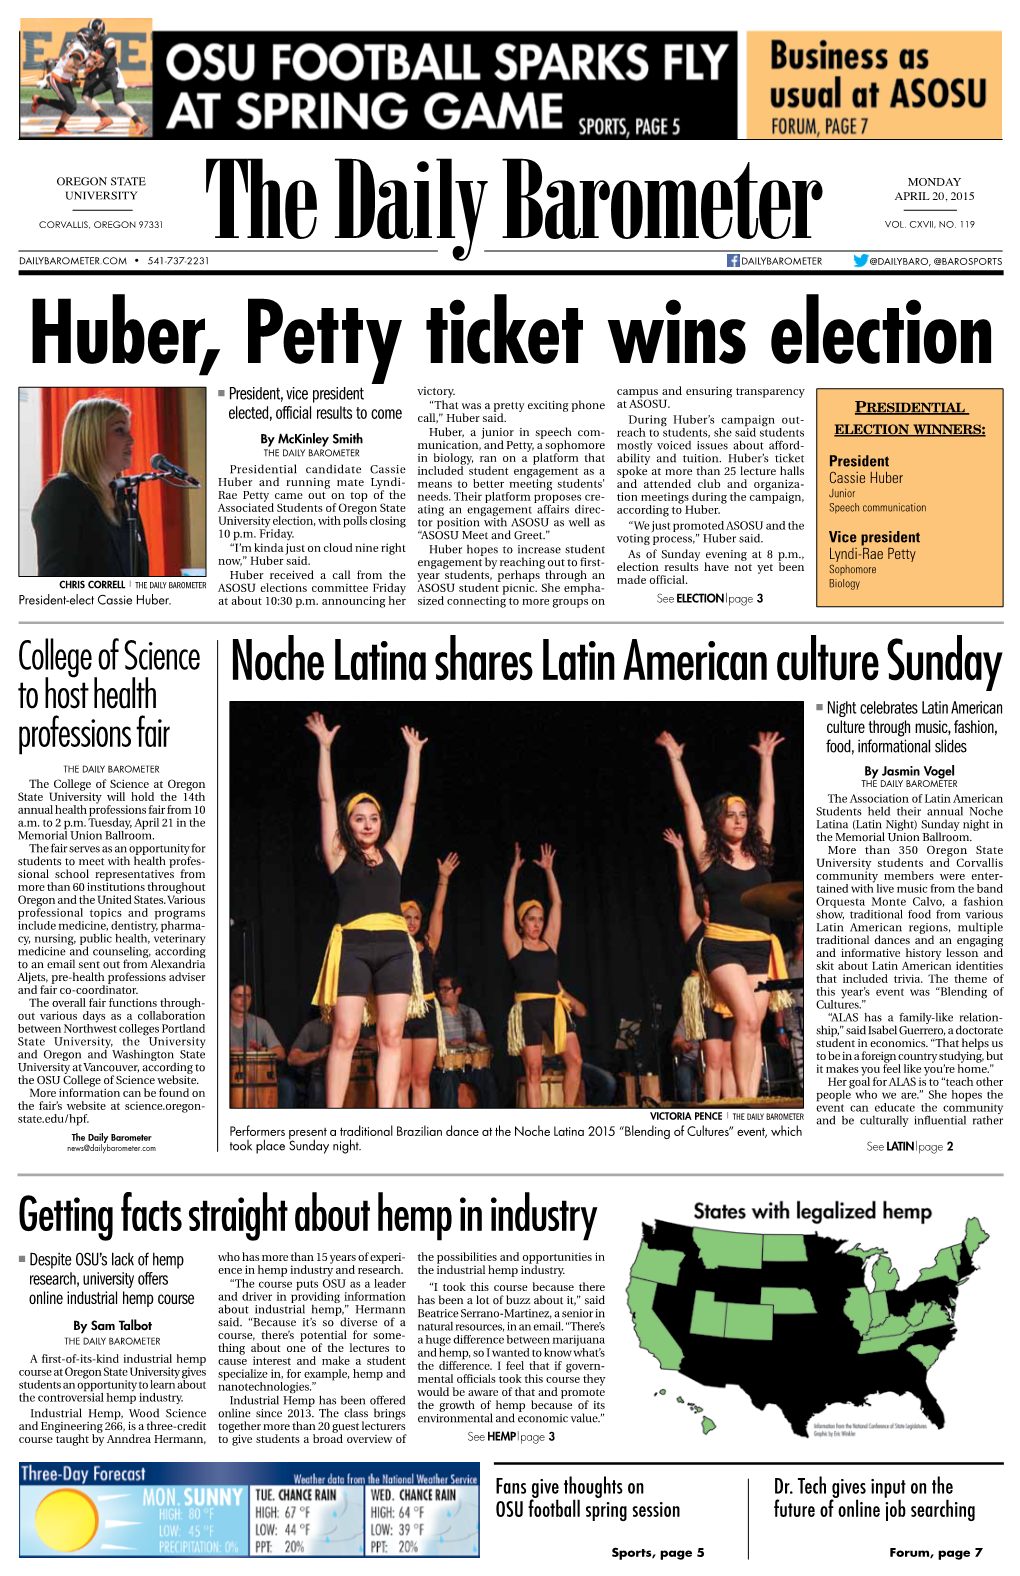 Huber, Petty Ticket Wins Election N President, Vice President Victory